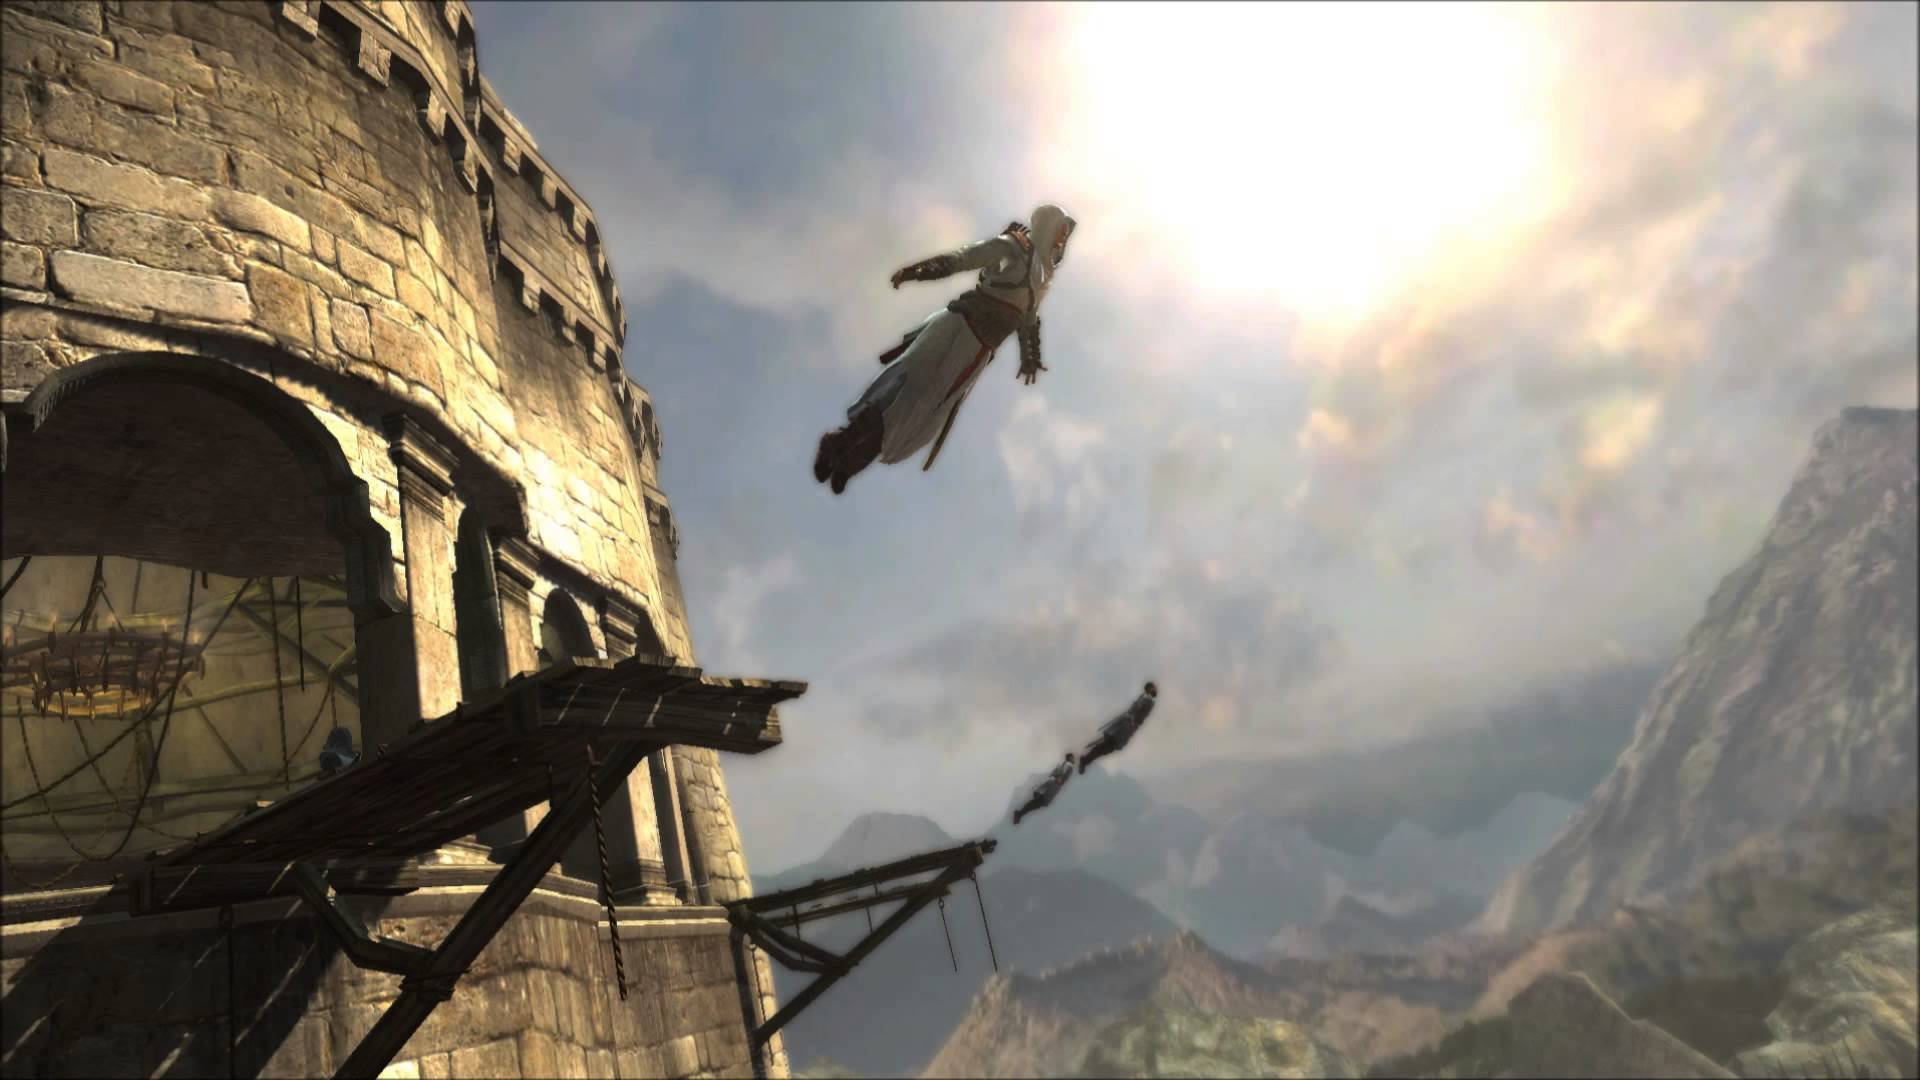 The stuntman will recreate the famous jump from the long-running videogame